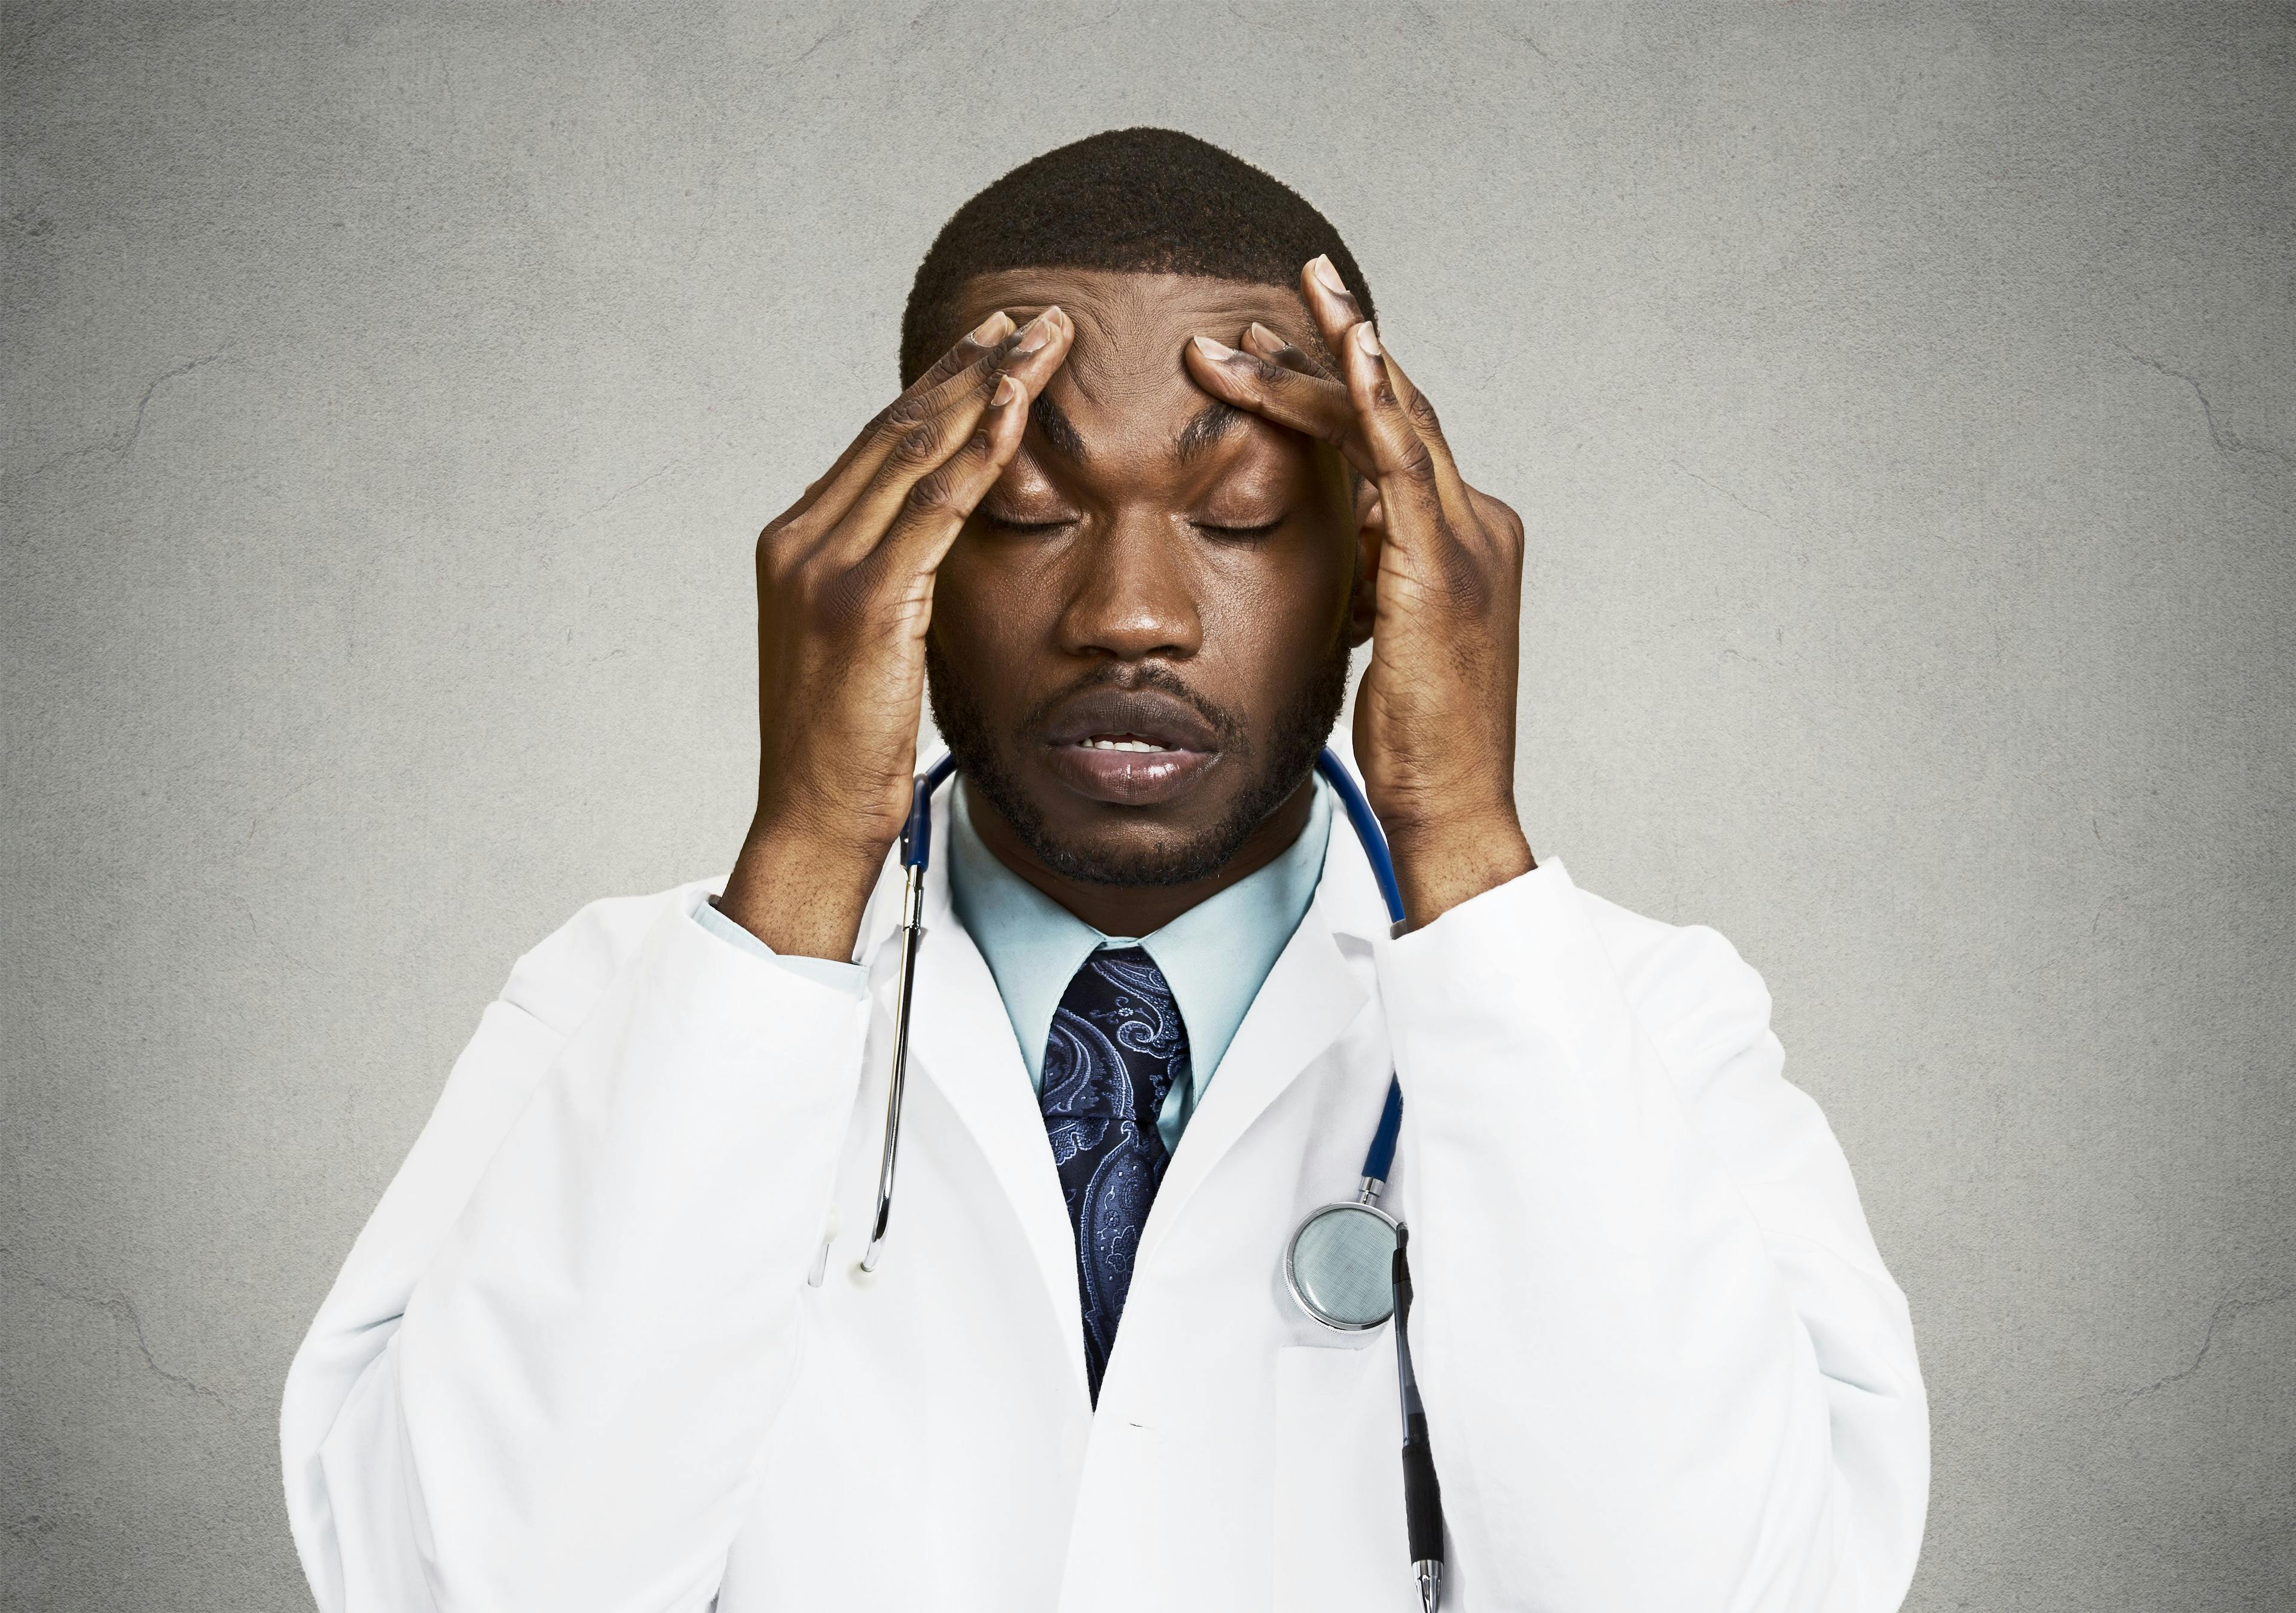 Physician burnout and self-care